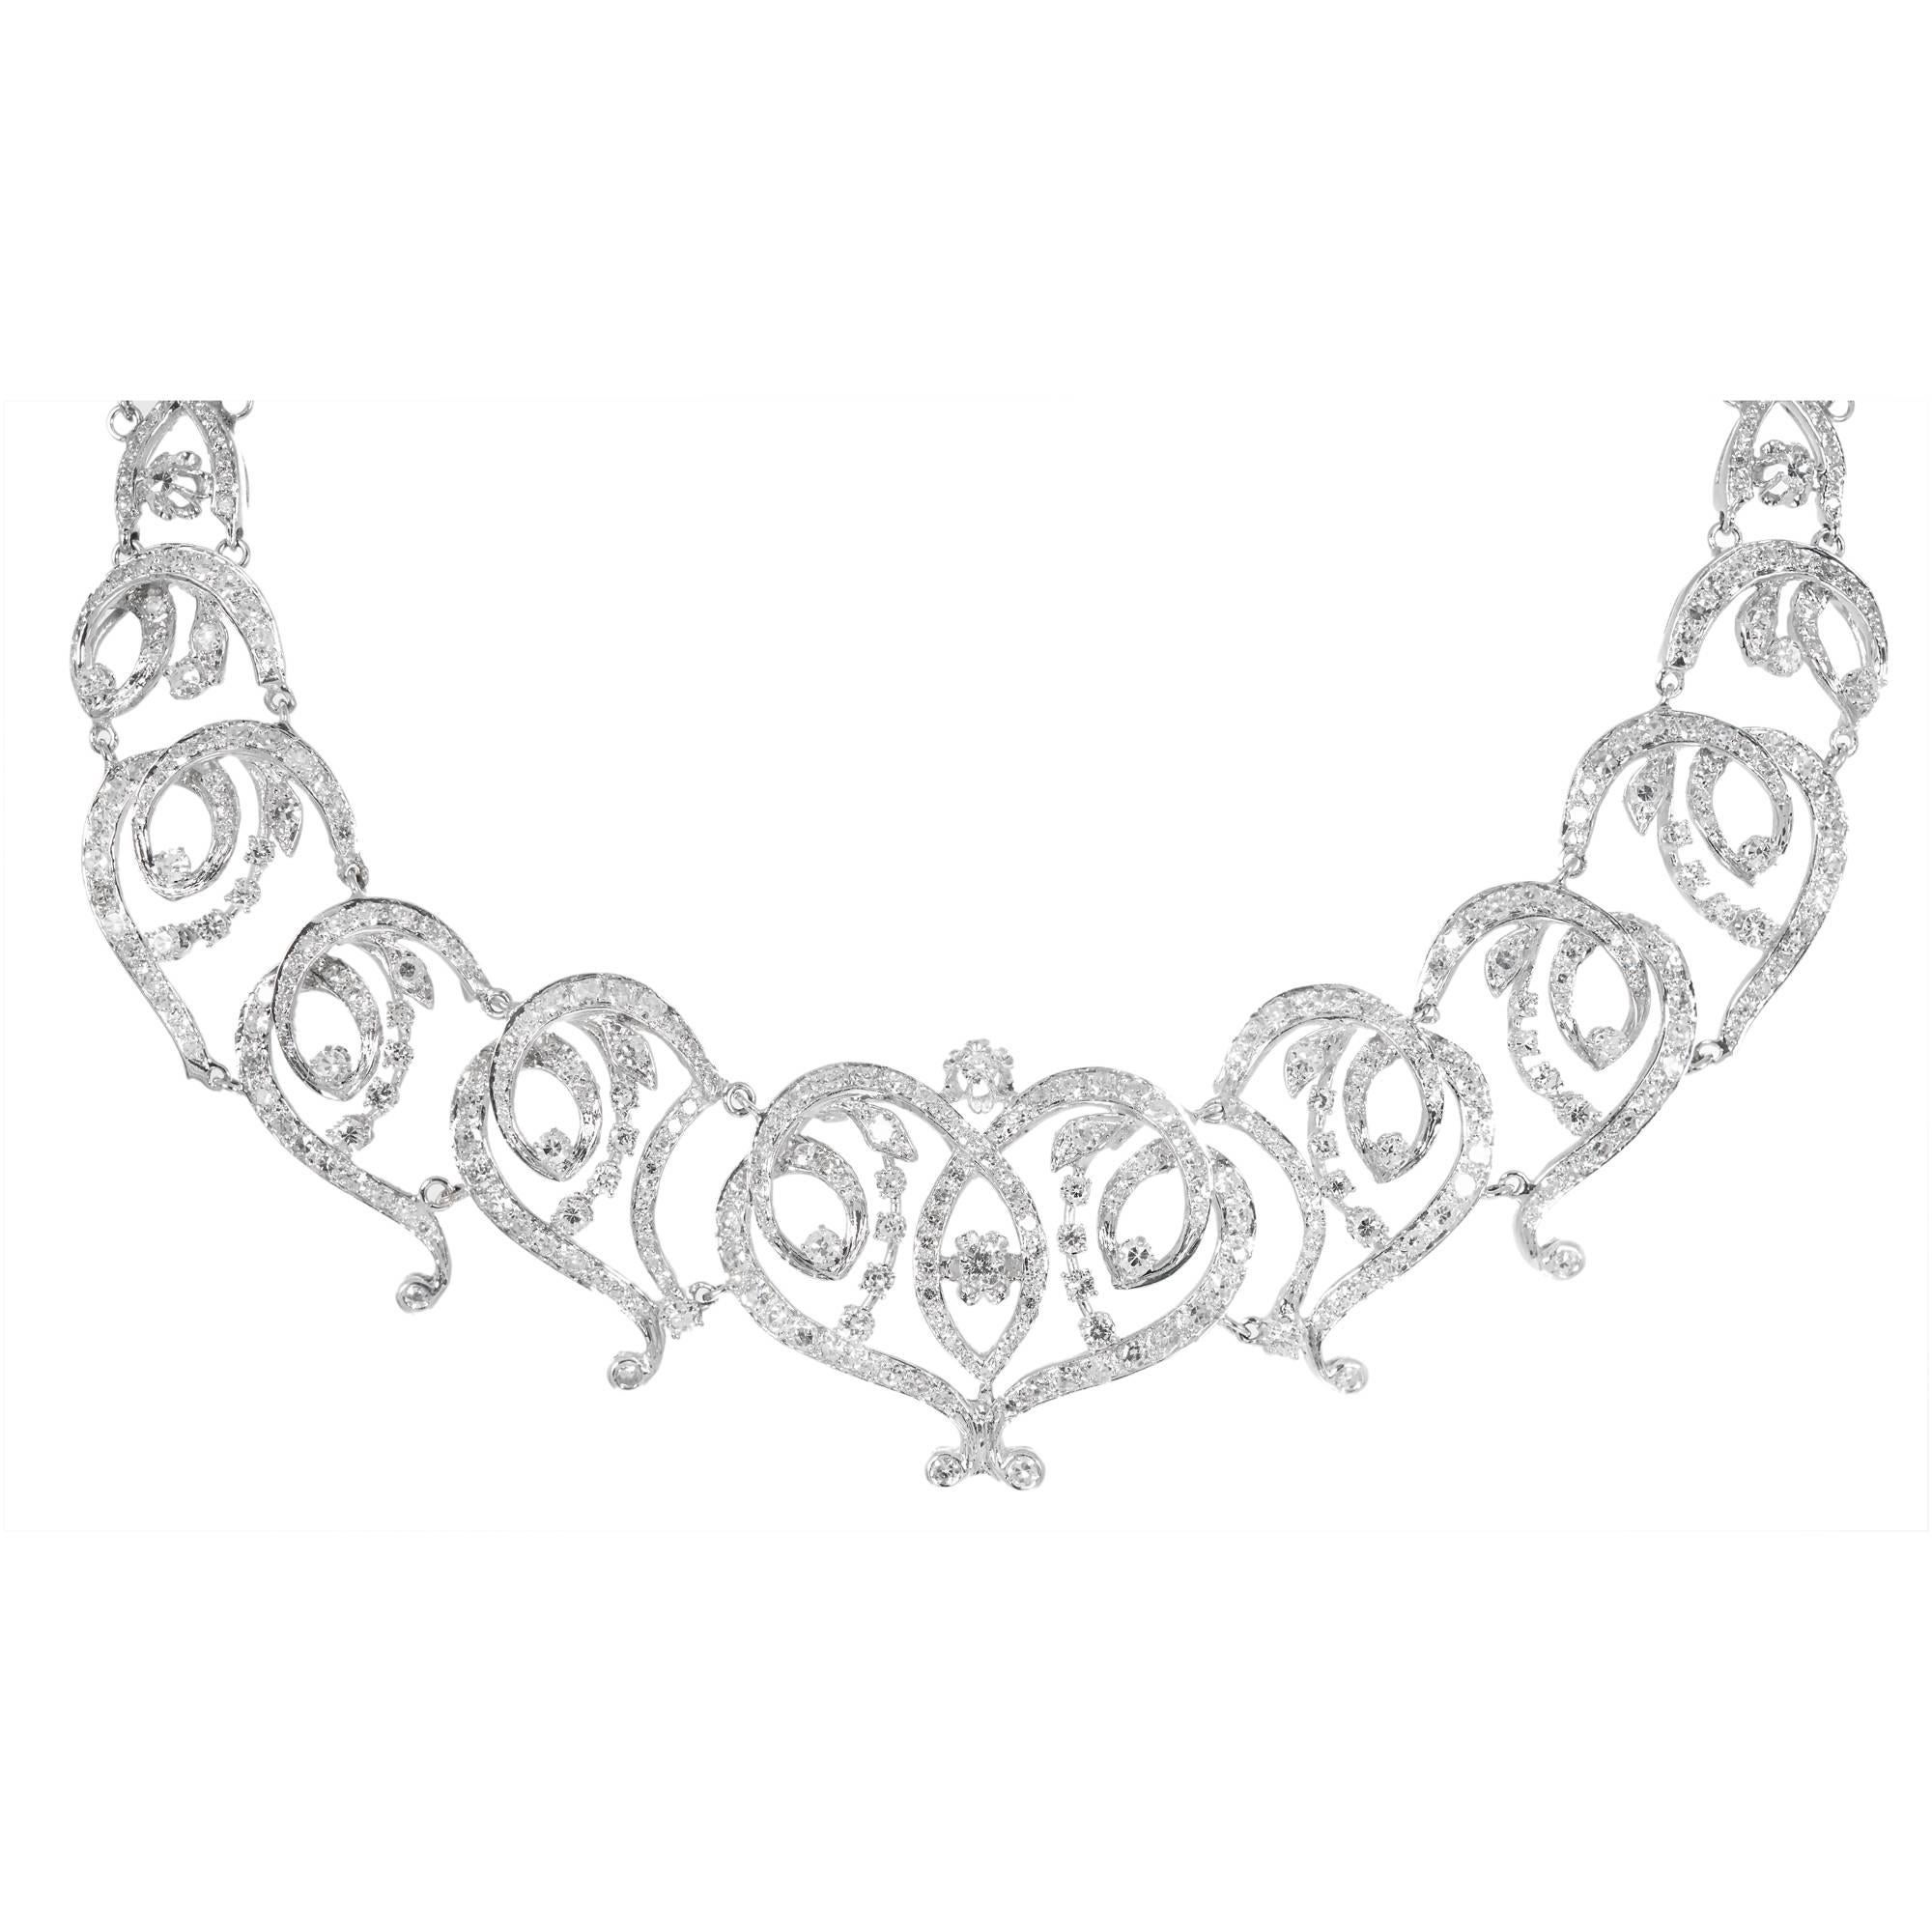 1950's swirl link white gold diamond necklace set with 11.00cts of mixed full and single cut diamonds. Diamond sections go all around the neck. 16.5 inches. 

600 round diamonds, approx. total weight 11.00cts, H – I, VS – SI
Length: 16.5 inches
14k